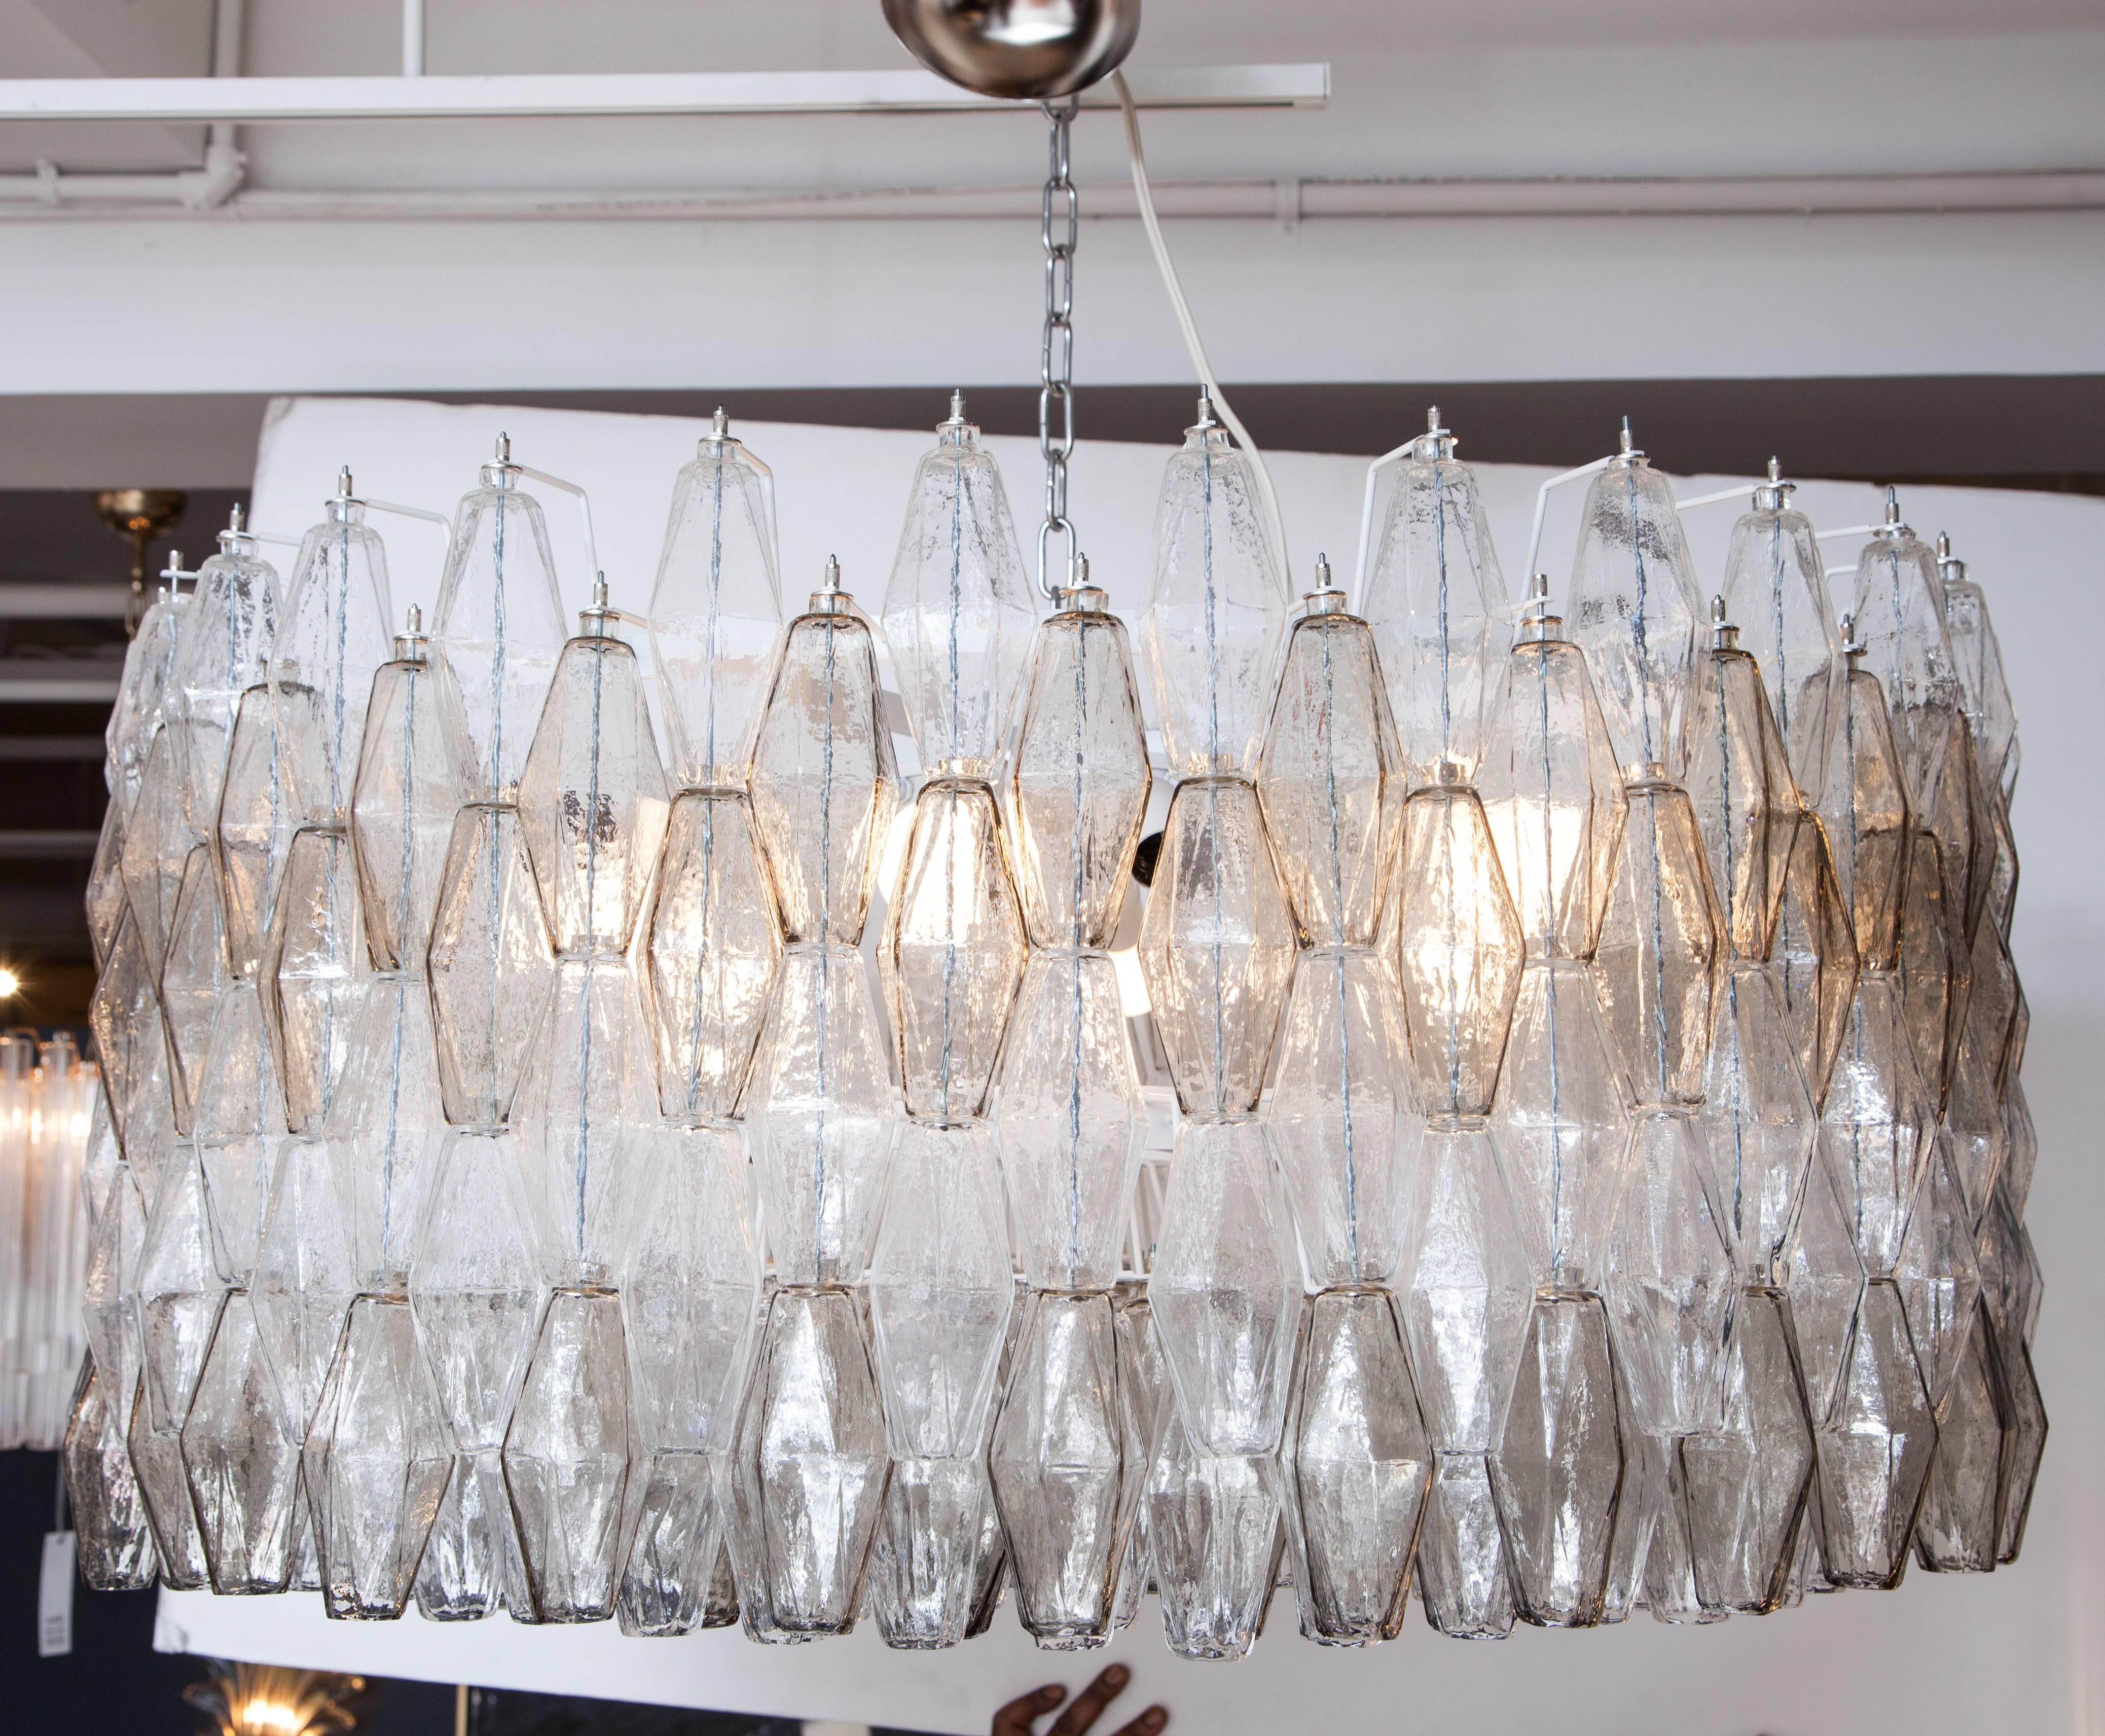 This Venini style Italian five-tier chandelier is absolutely breathtaking. Consisting of hundreds of individually handblown polyhedral-shaped glass elements in alternating colors of grayish smoke taupe and clear suspended from a polished chrome